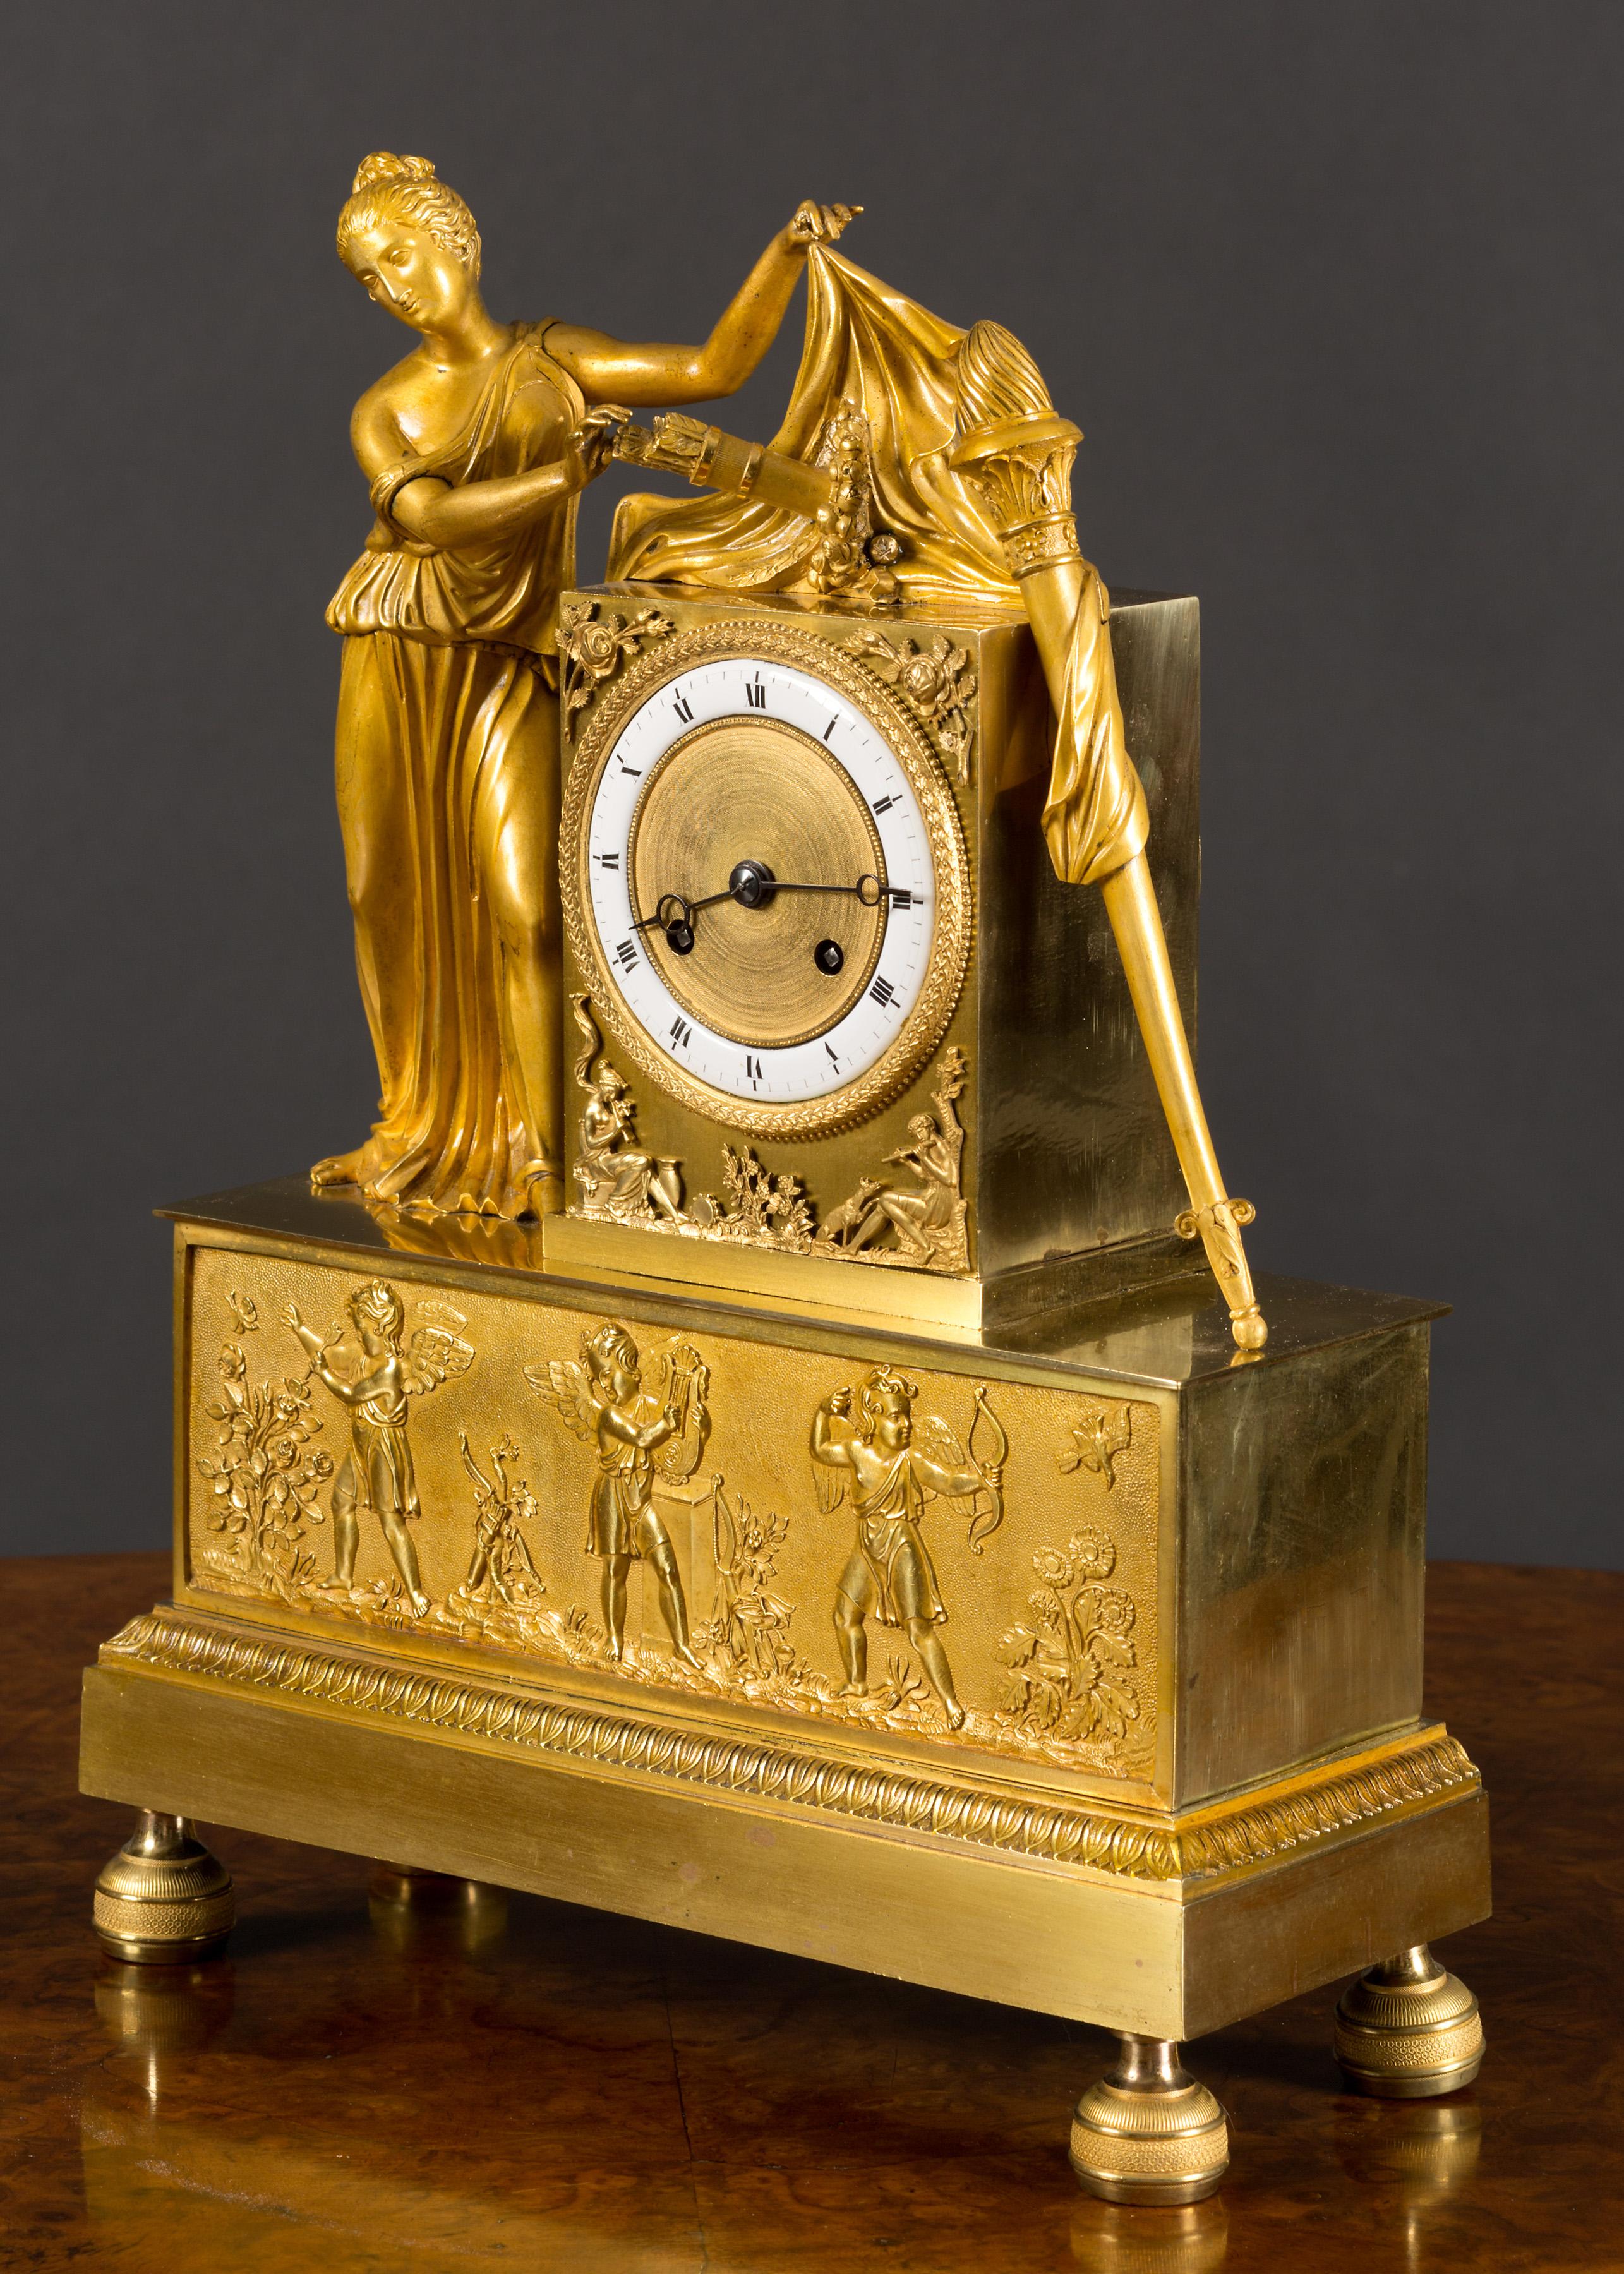 French ormolu mantel clock standing on a stepped base and resting on turned, chased feet with acanthus leaf decoration below a finely chased foliate frieze featuring three cherubs.

Gilded 3 inch dial with enamel chapter ring, Roman numerals and